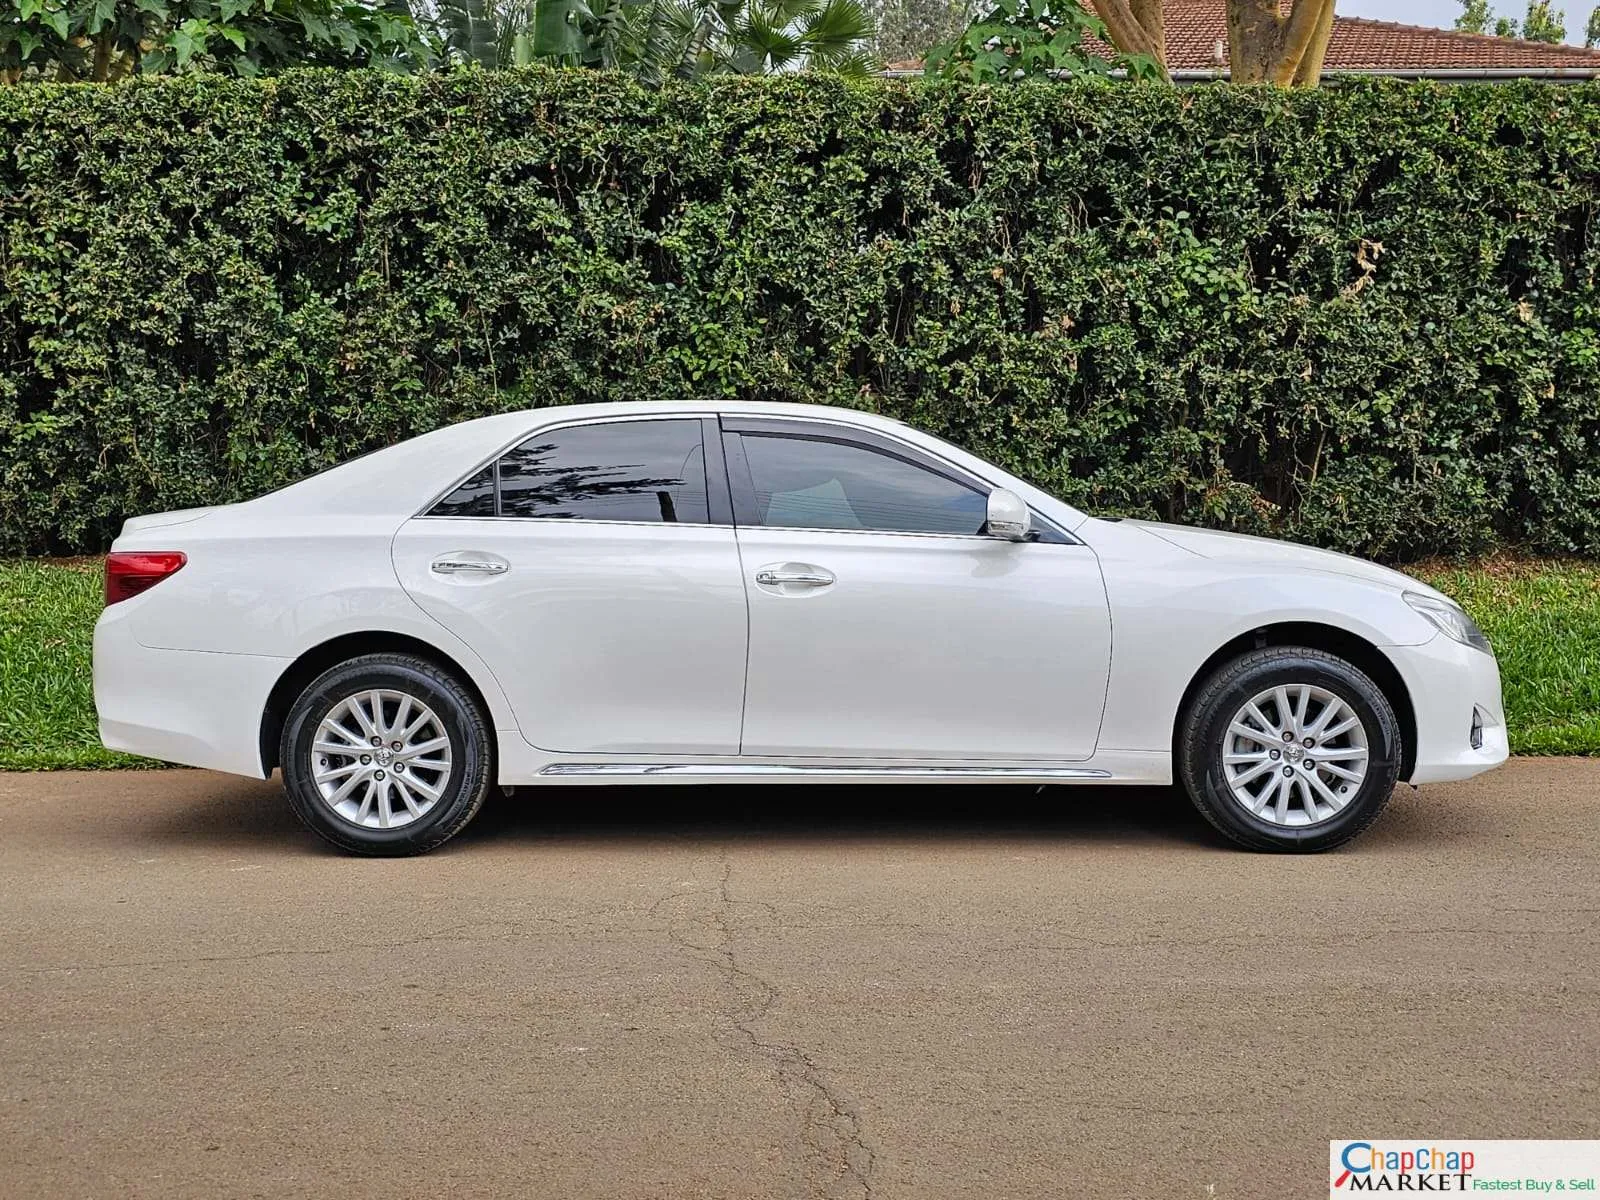 Cars Cars For Sale/Vehicles-Toyota Mark X QUICK SALE You Pay 30% Deposit Trade in OK Wow EXCLUSIVE